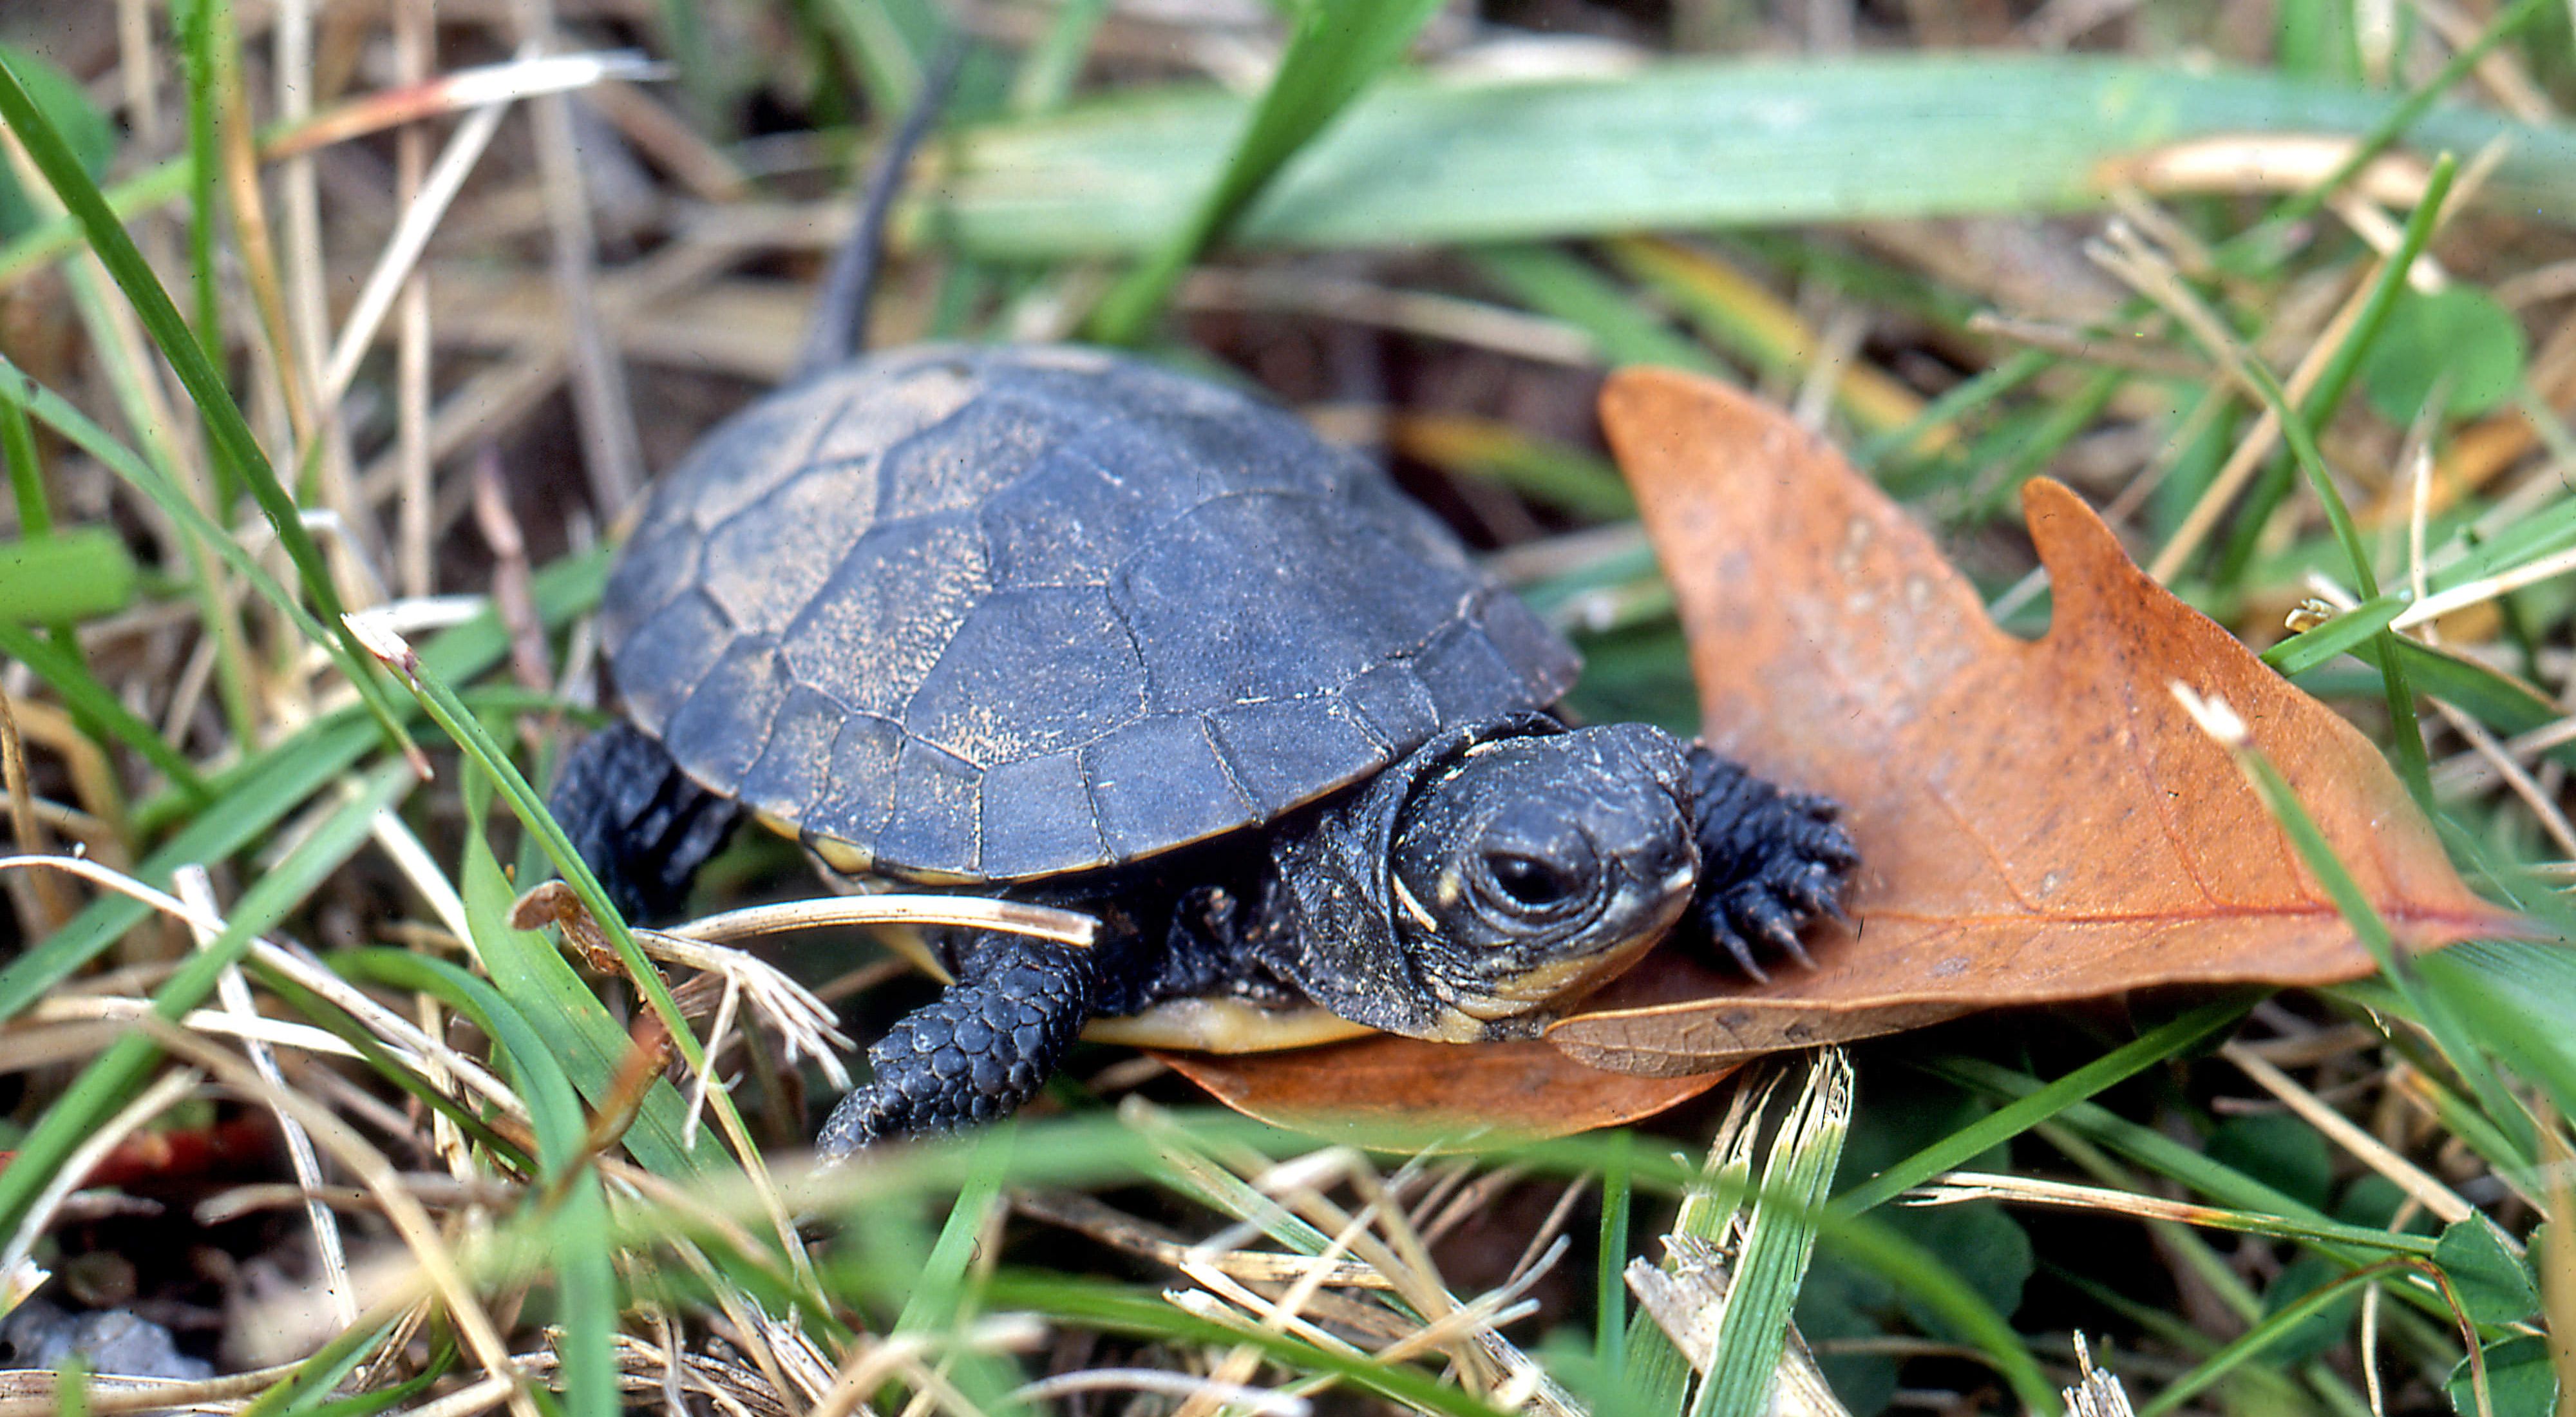 a small dark turtle on leaf surrounded by green grass.